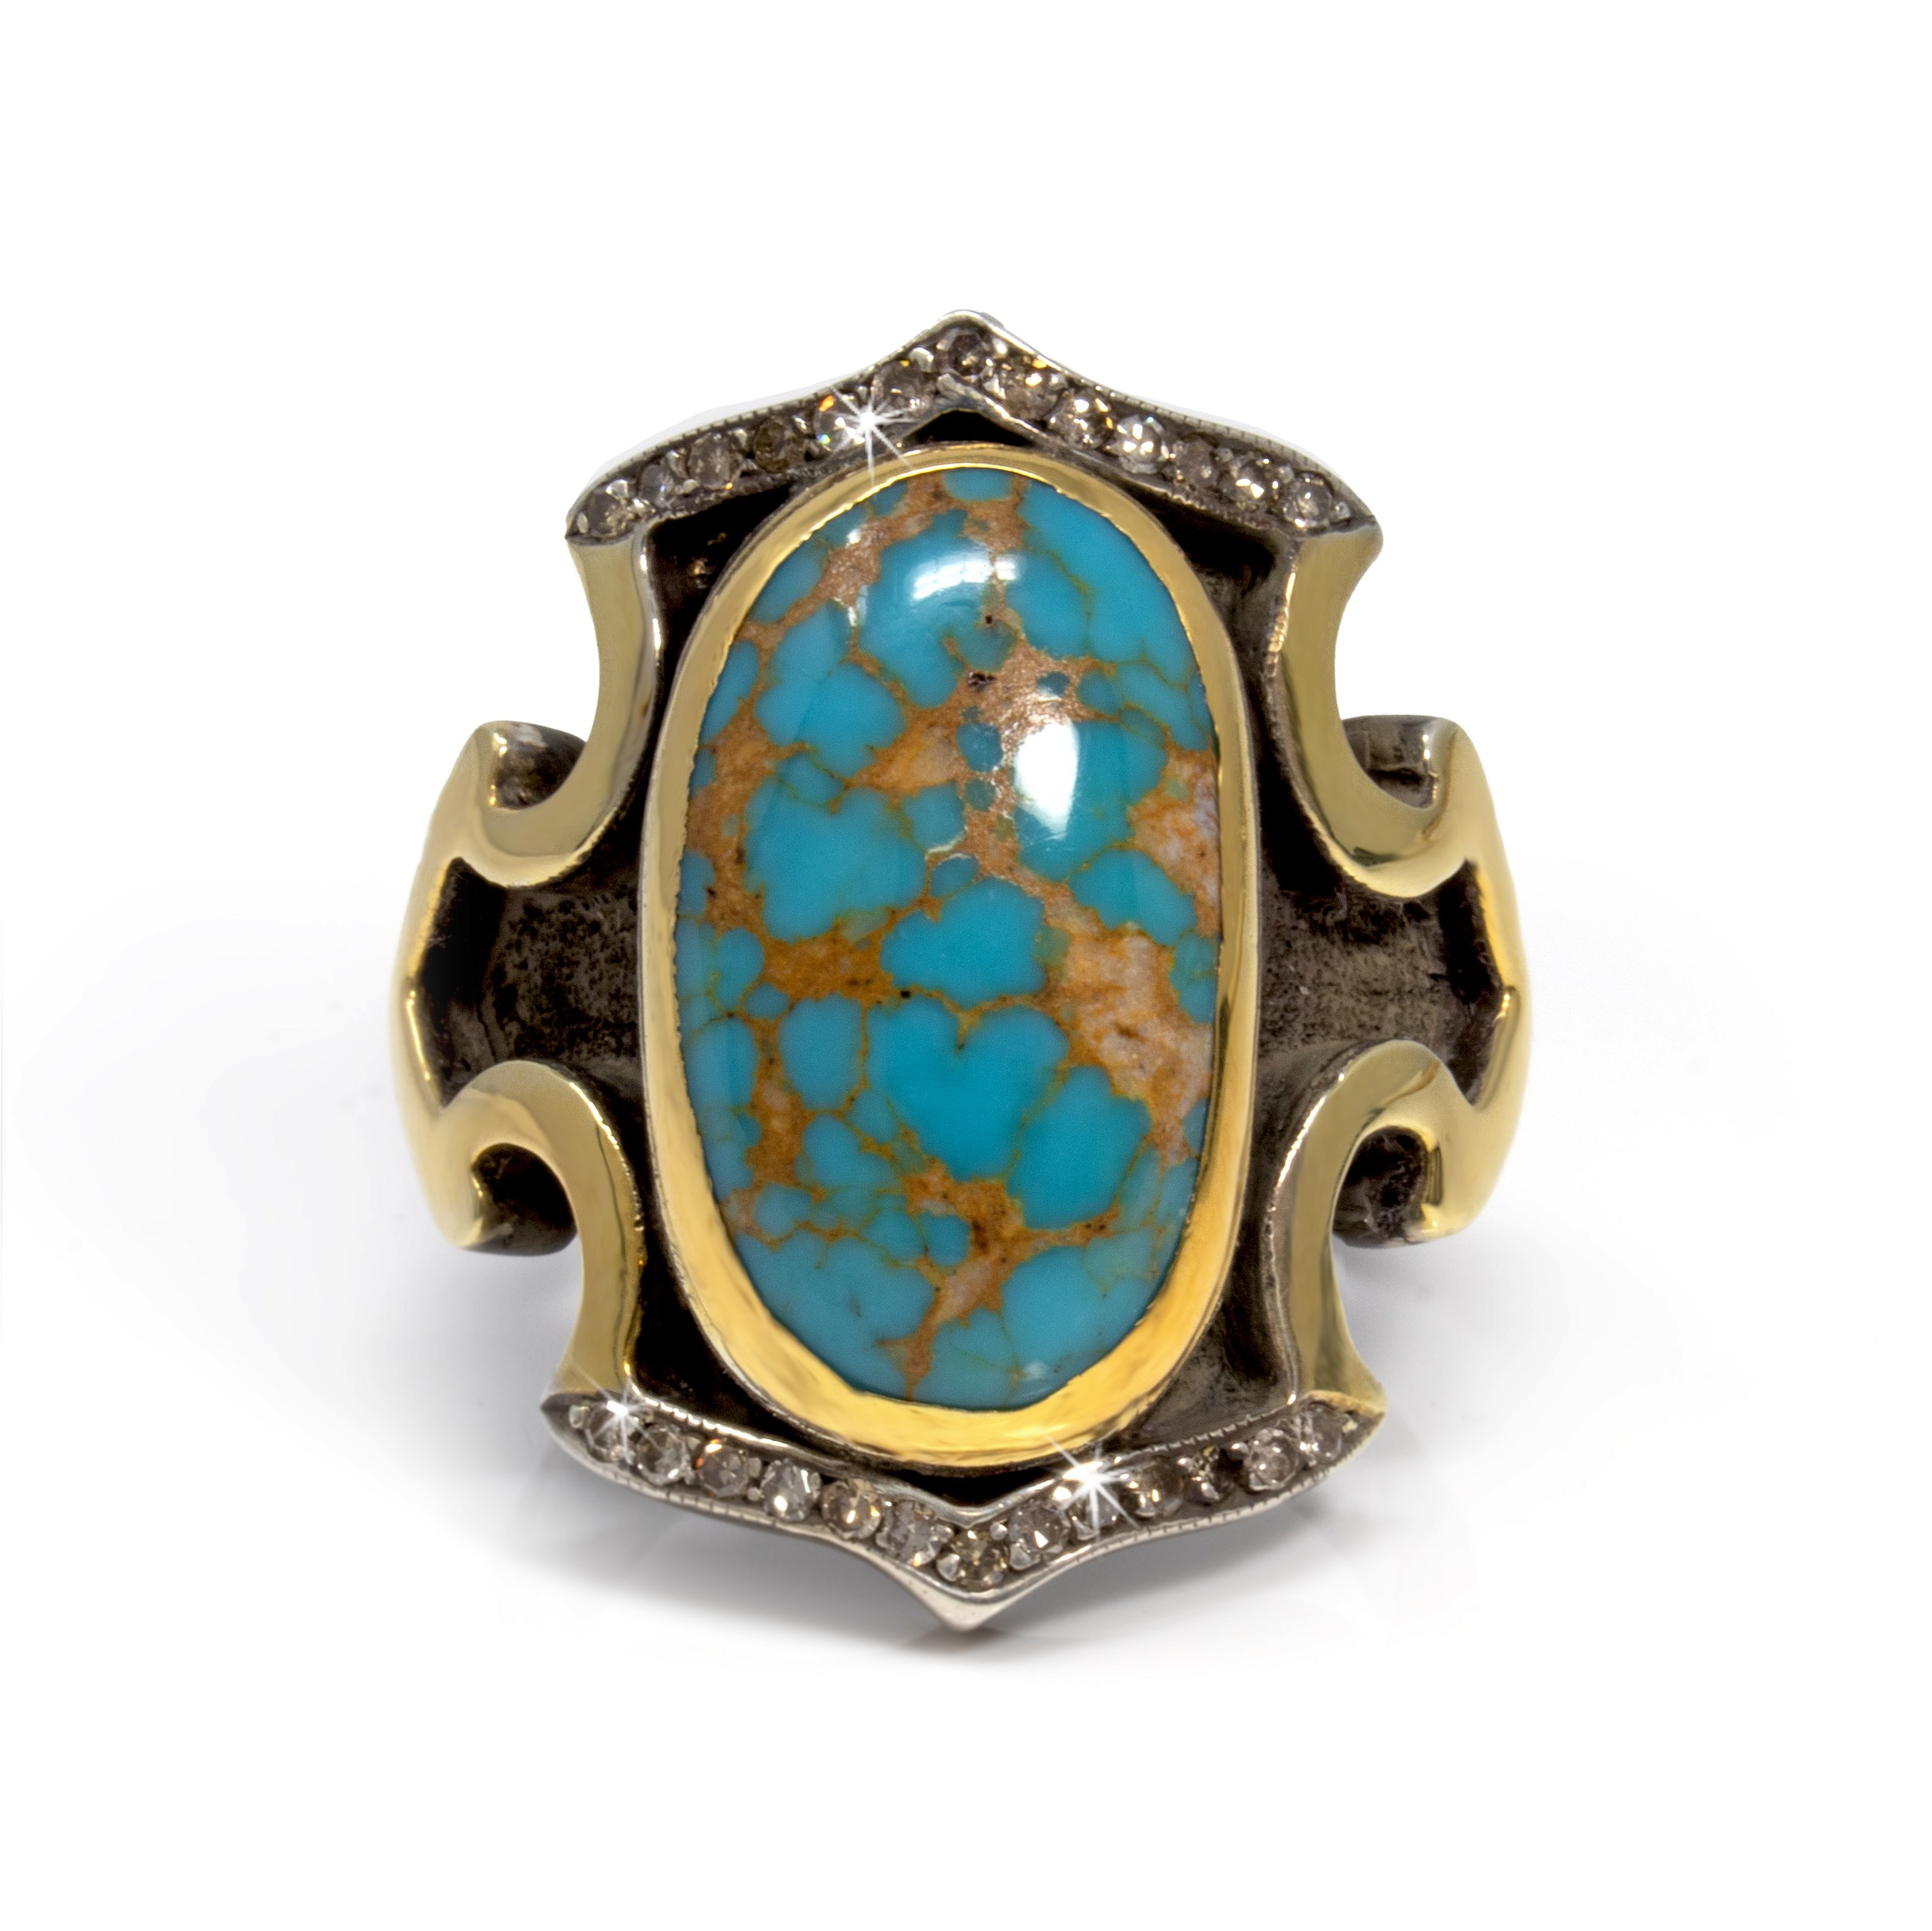 Persian Turquoise Ring Size 8.5 - Elongated Oval Cabochon Set On Industrial Floral Design Band With Diamonds & Gold Vermeil Accents With Matte Oxidized Finish